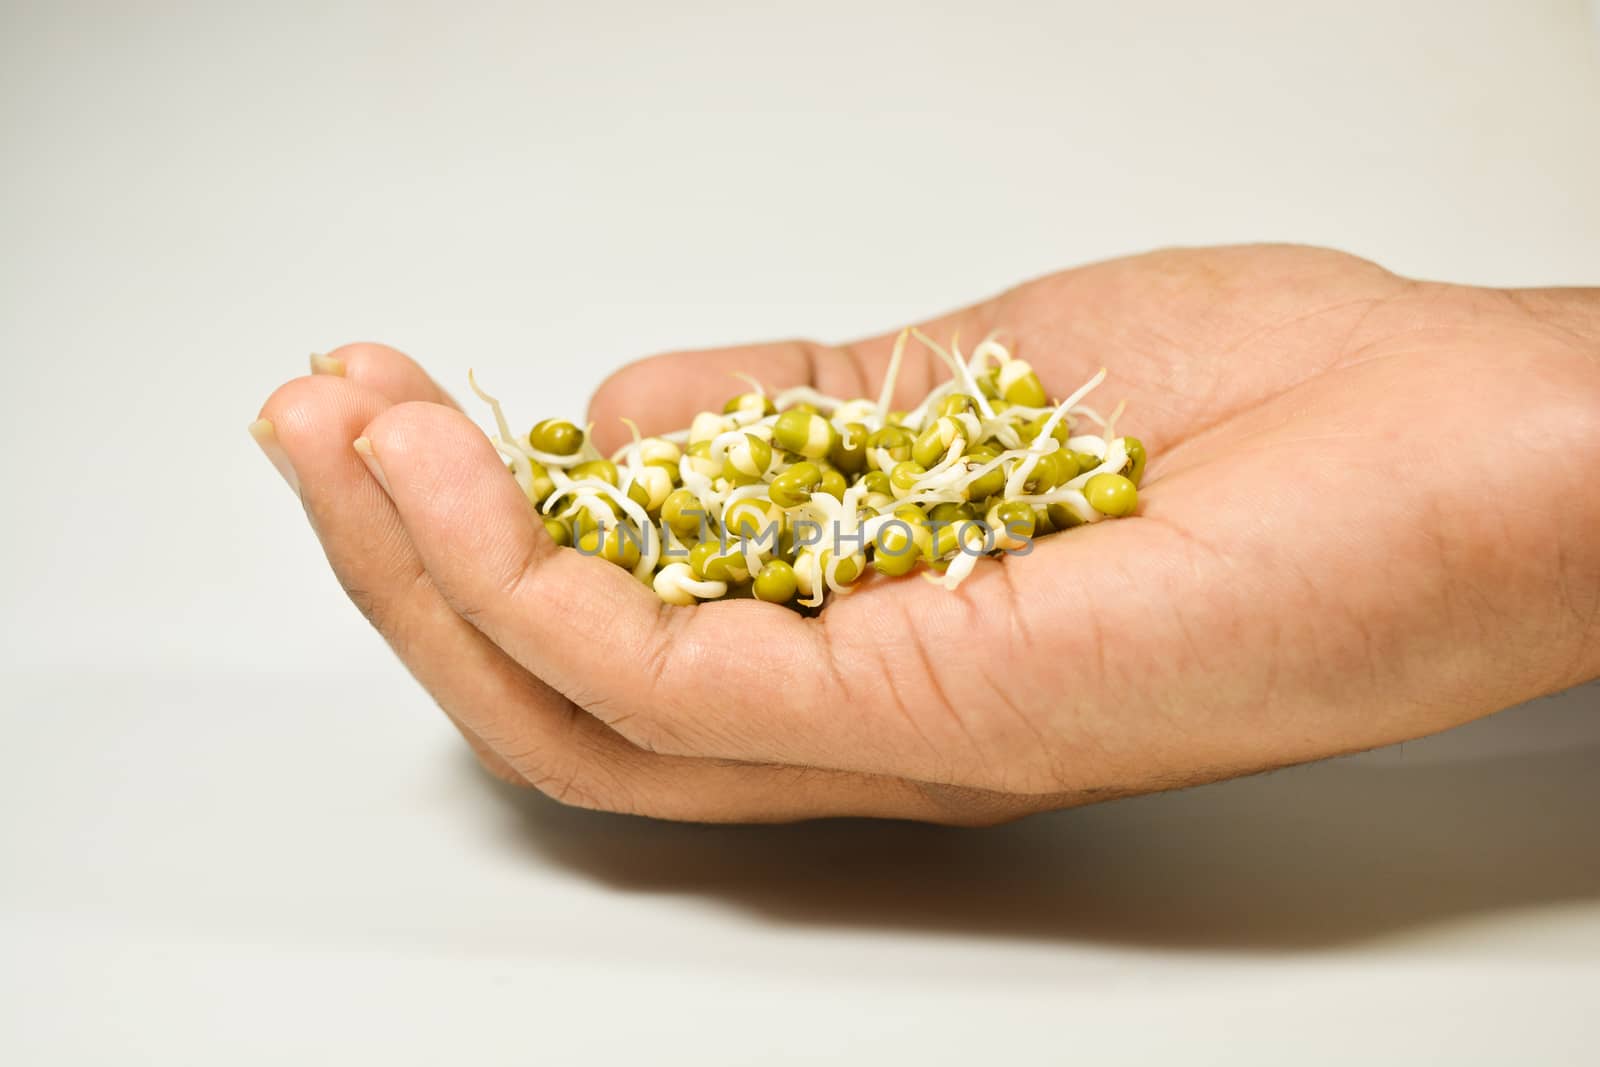 sprouted green gram hand on isolated white background.